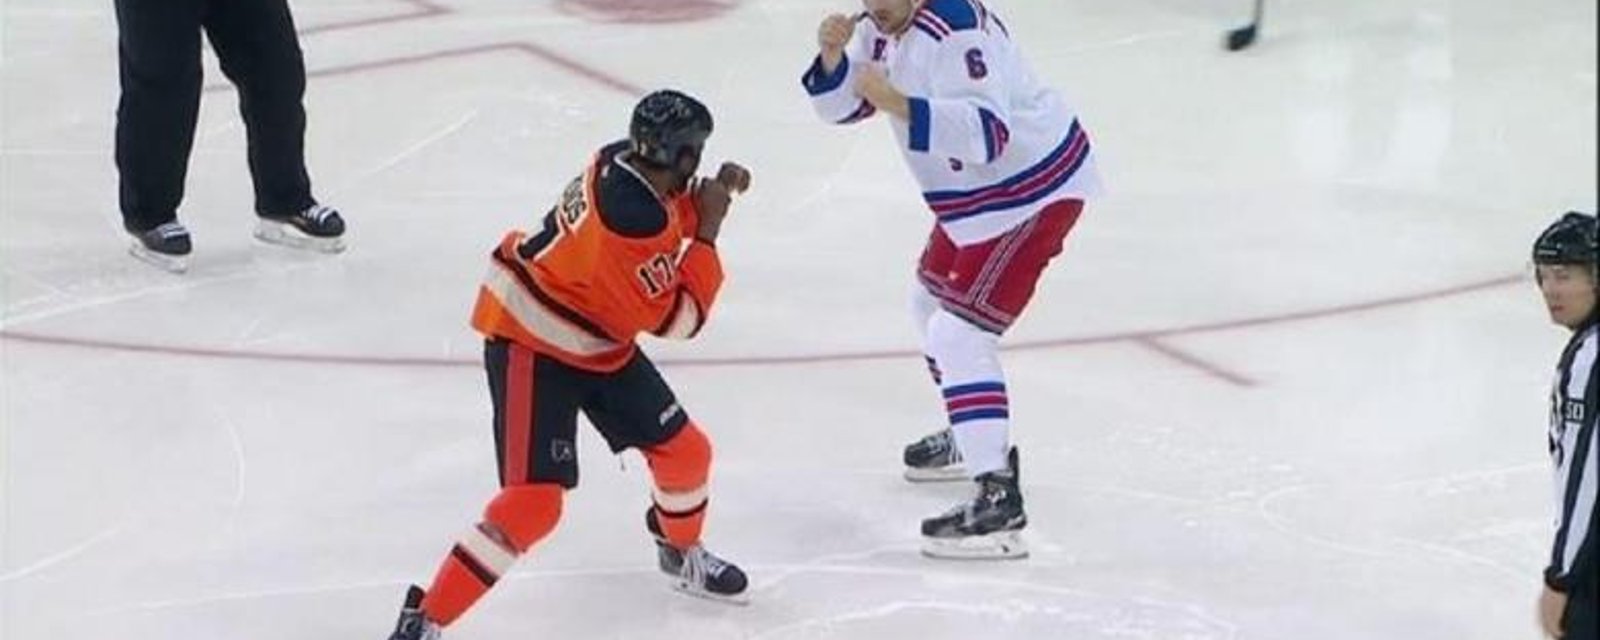 Rangers' McIlrath takes on Flyers' Simmonds after notorious punch to the face.